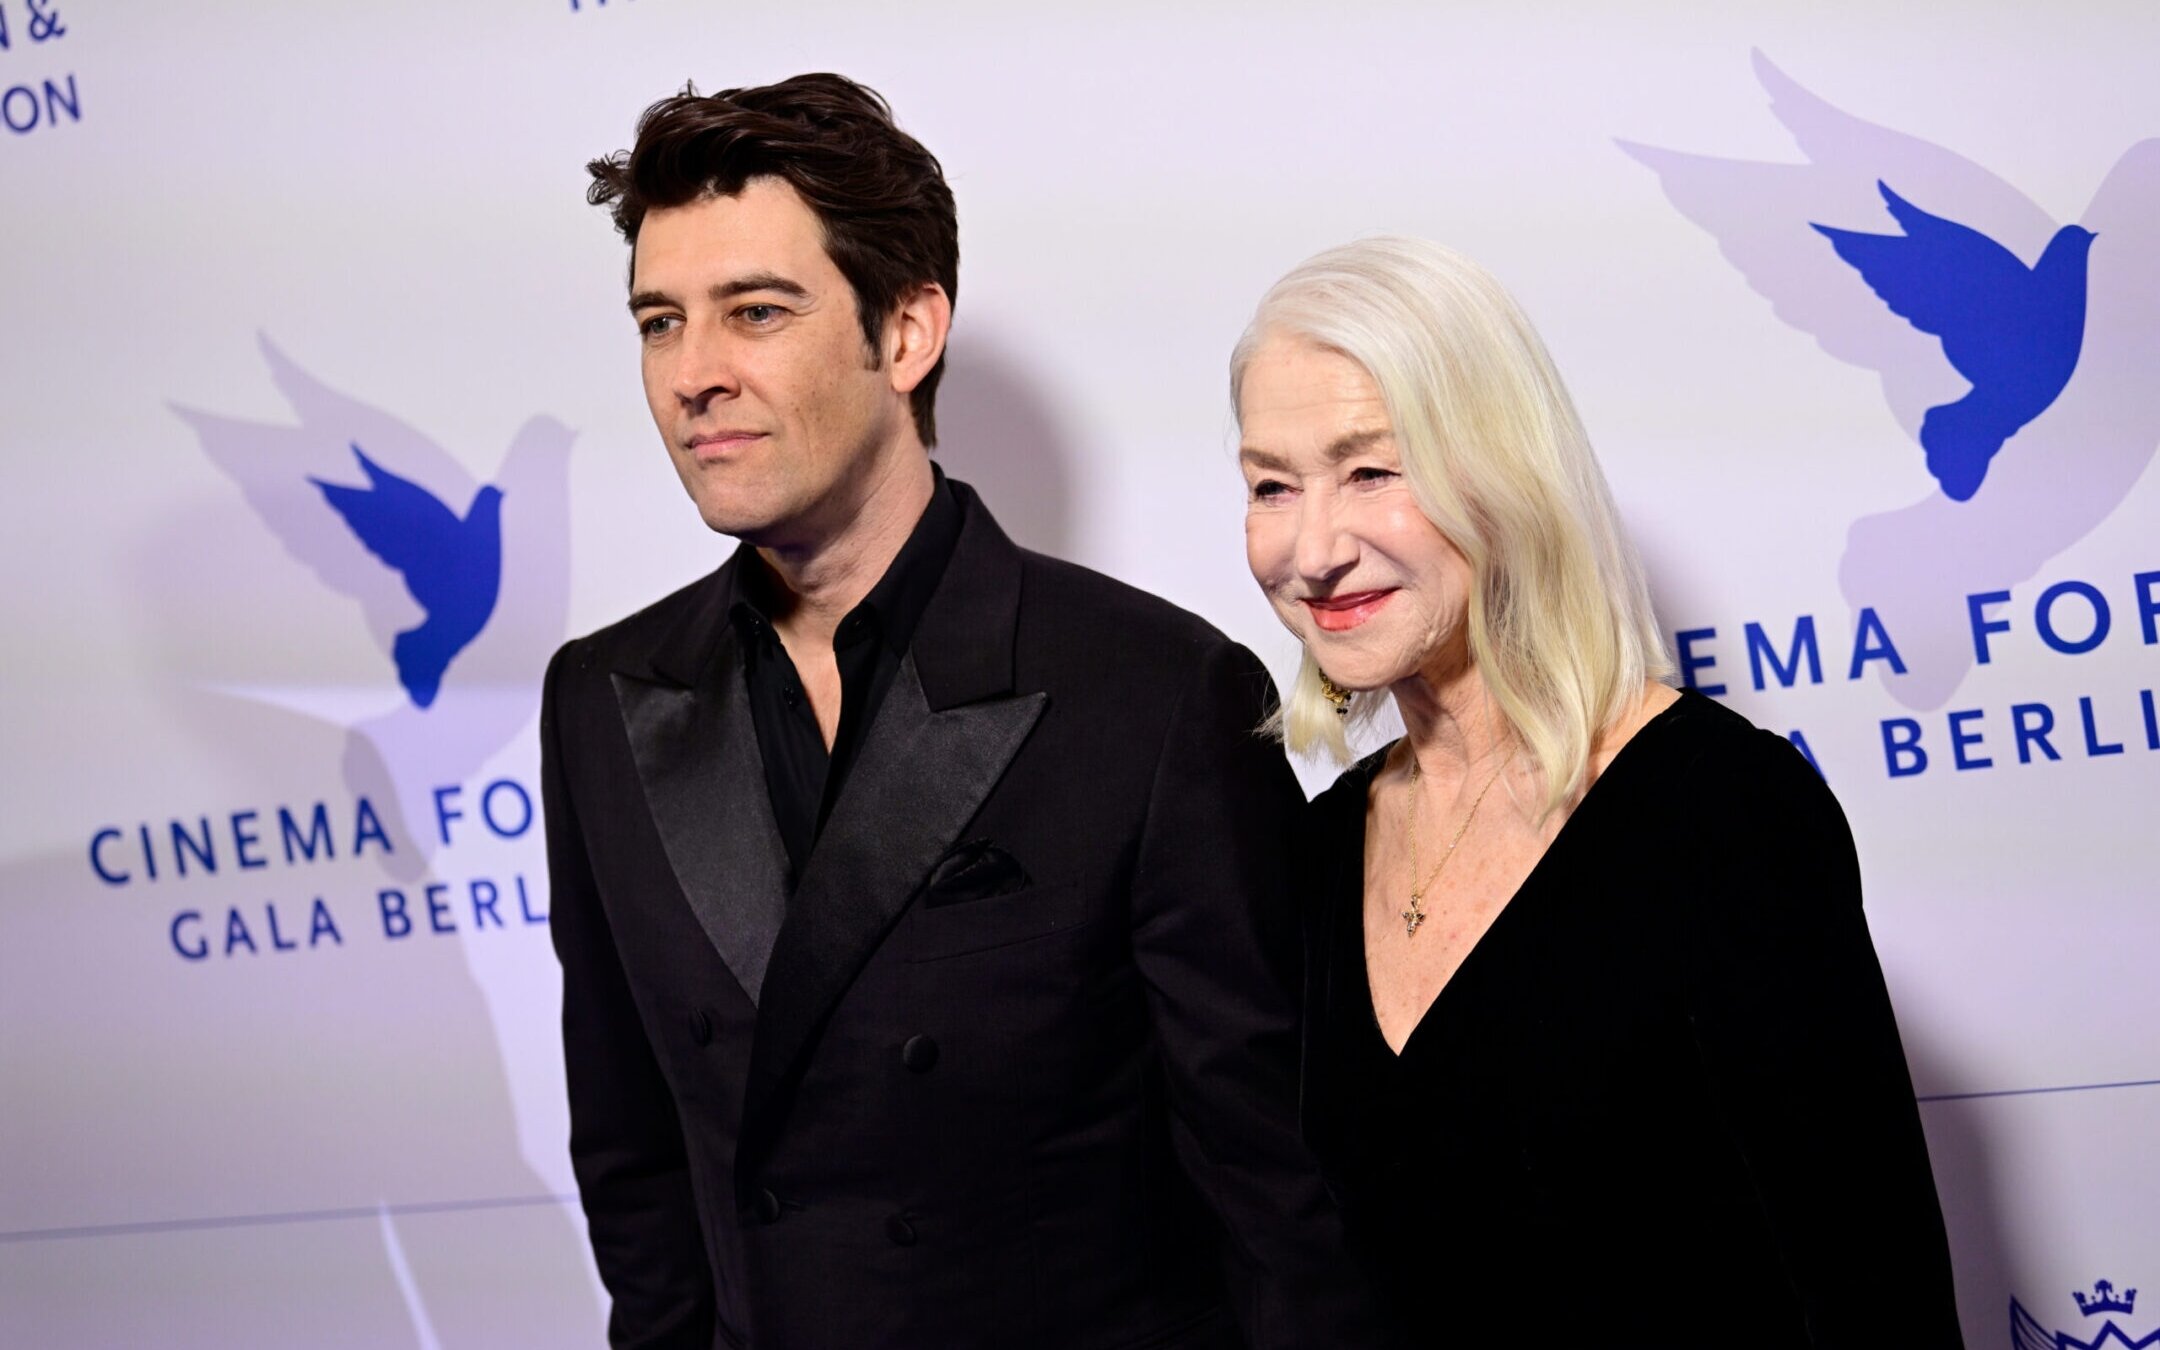 Actress Helen Mirren and Guy Nattiv, film director and screenwriter, attend the Cinema for Peace Gala Berlin, Feb. 19, 2024. (Fabian Sommer/Picture alliance via Getty Images)